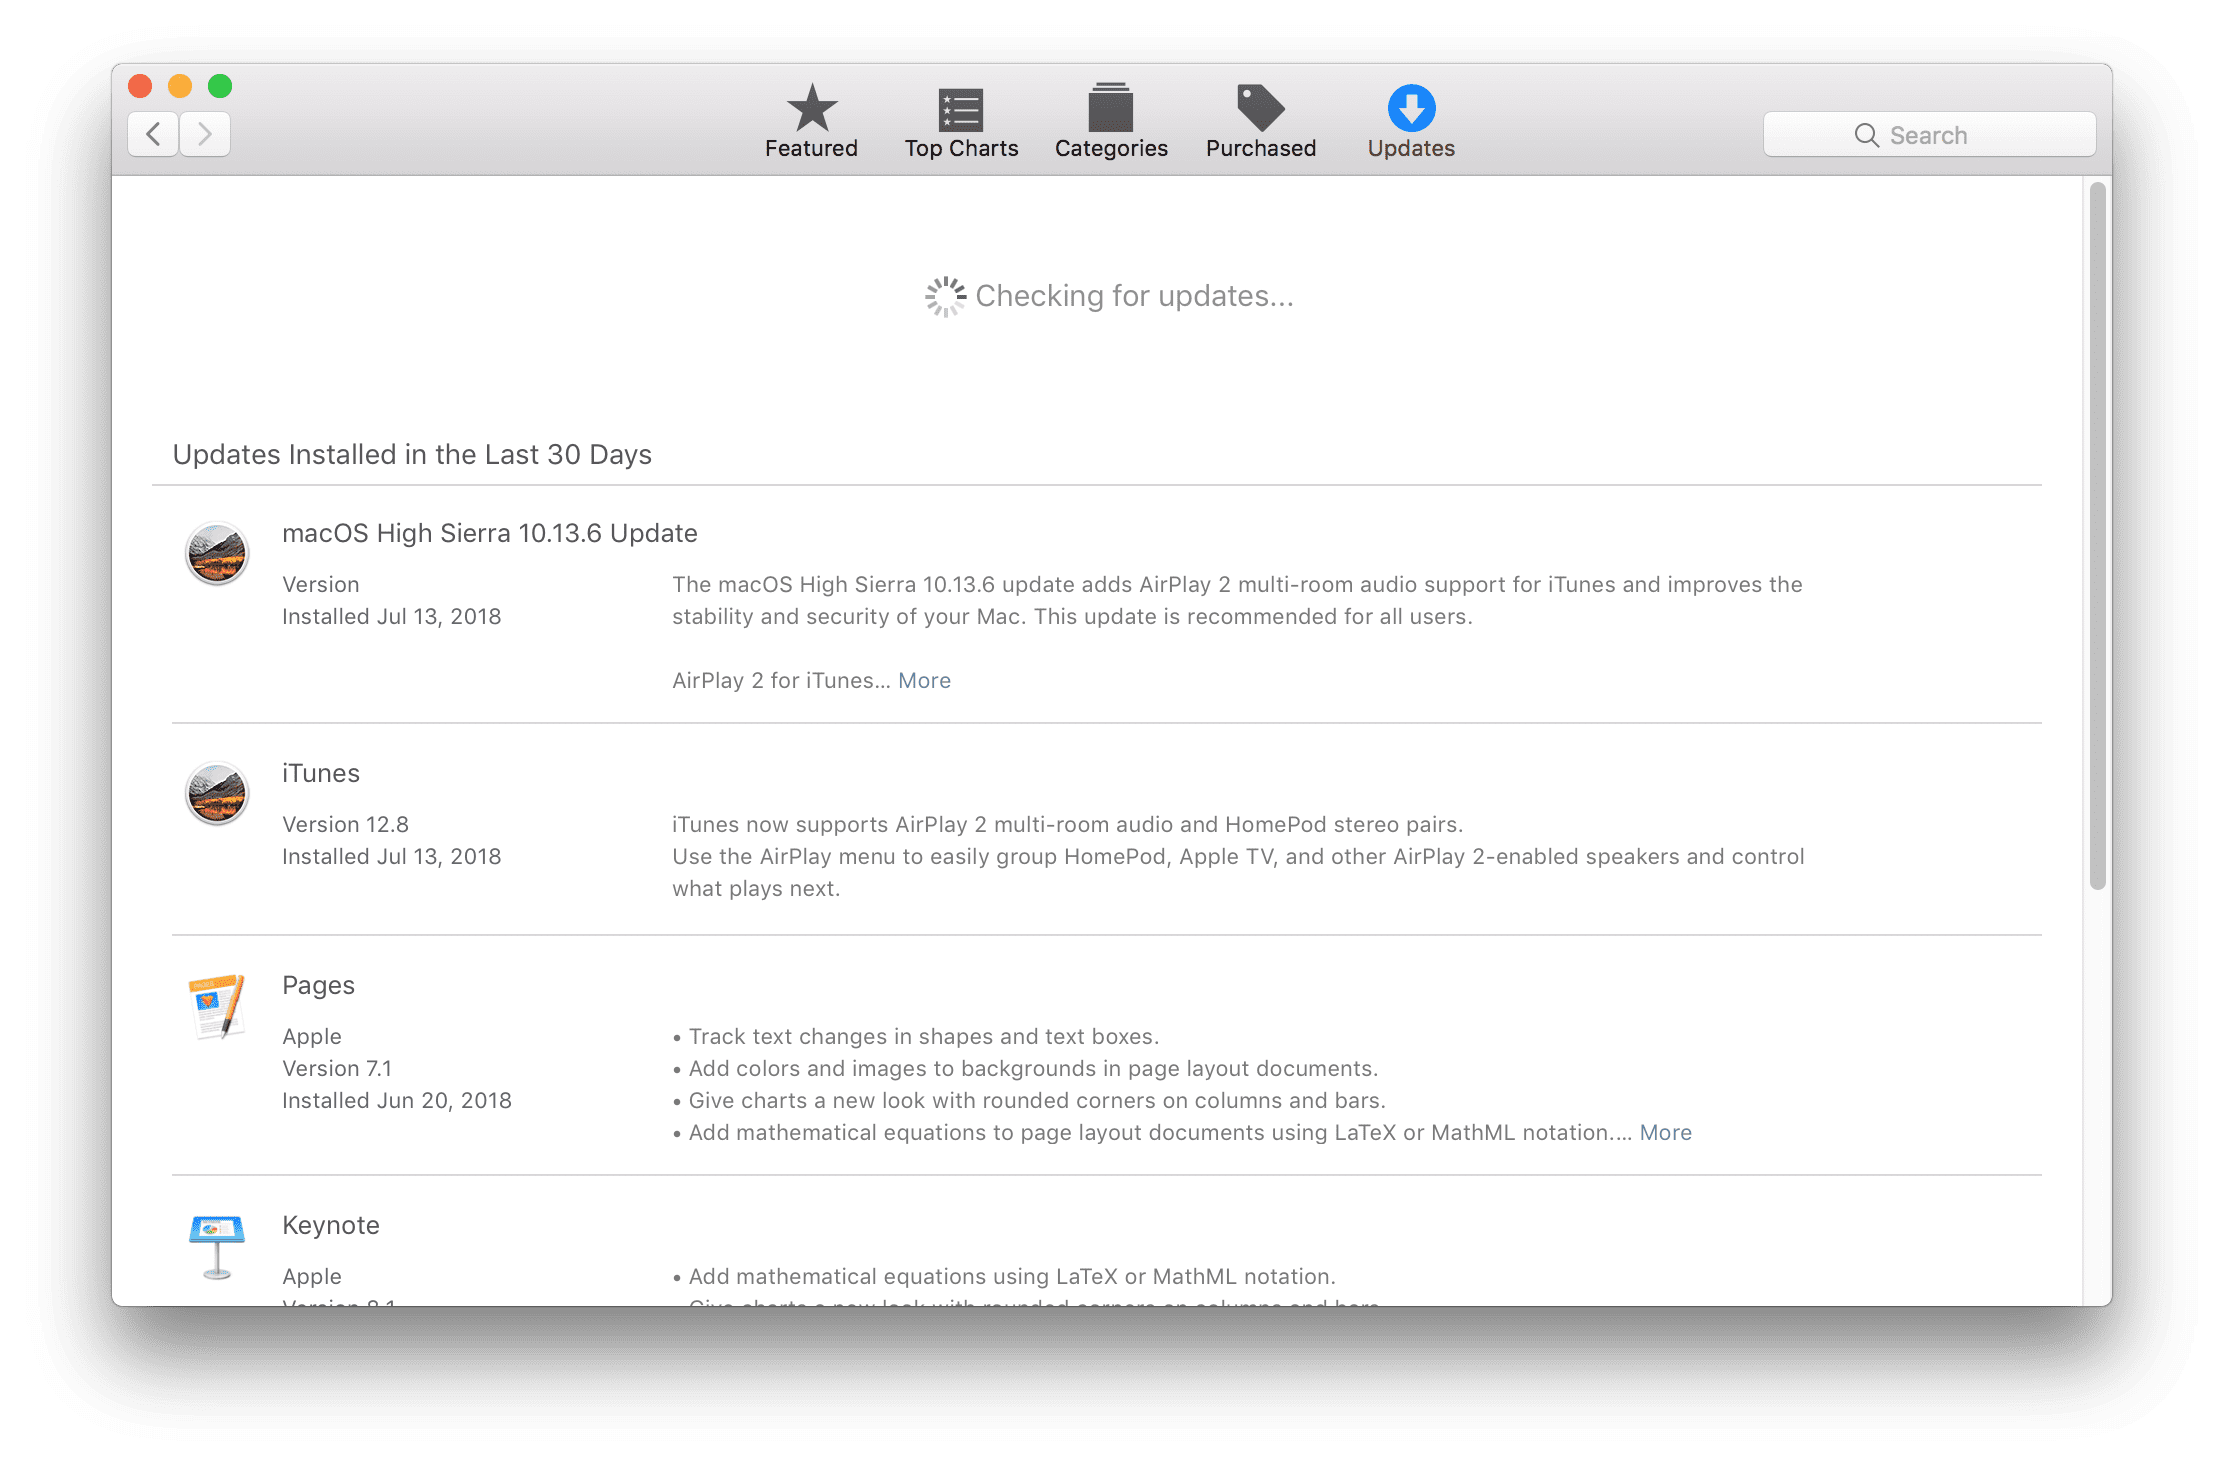 MacOS Update App Store "width =" 2224 "height =" 1466 "srcset =" https://www.parallels.com/blogs/app/uploads/2018/08/Check-for-Updates-Mac-App-Store- 2.6.png 2224w, https://www.parallels.com/blogs/app/uploads/2018/08/Check-for-Updates-Mac-App-Store-2.6-300x198.png 300w, https: // www. parallels.com/blogs/app/uploads/2018/08/Check-for-Updates-Mac-App-Store-2.6-768x506.png 768w, https://www.parallels.com/blogs/app/uploads/2018 /08/Check-for-Updates-Mac-App-Store-2.6-1024x675.png 1024w "tailles =" (largeur maximale: 2224px) 100vw, 2224px